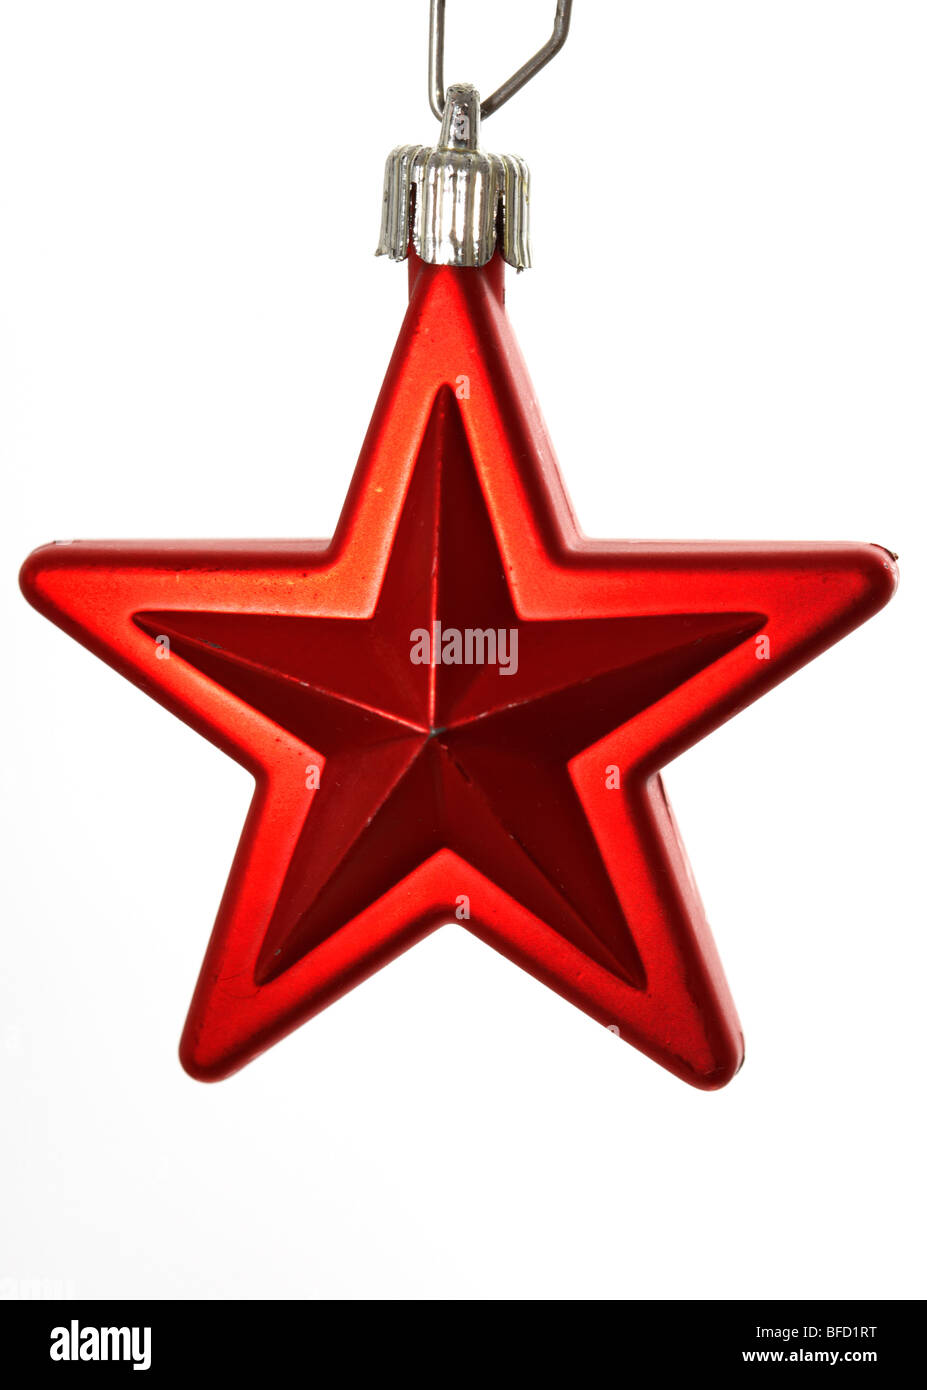 Un peu usé red star Christmas Tree decoration hanging against a white background Banque D'Images